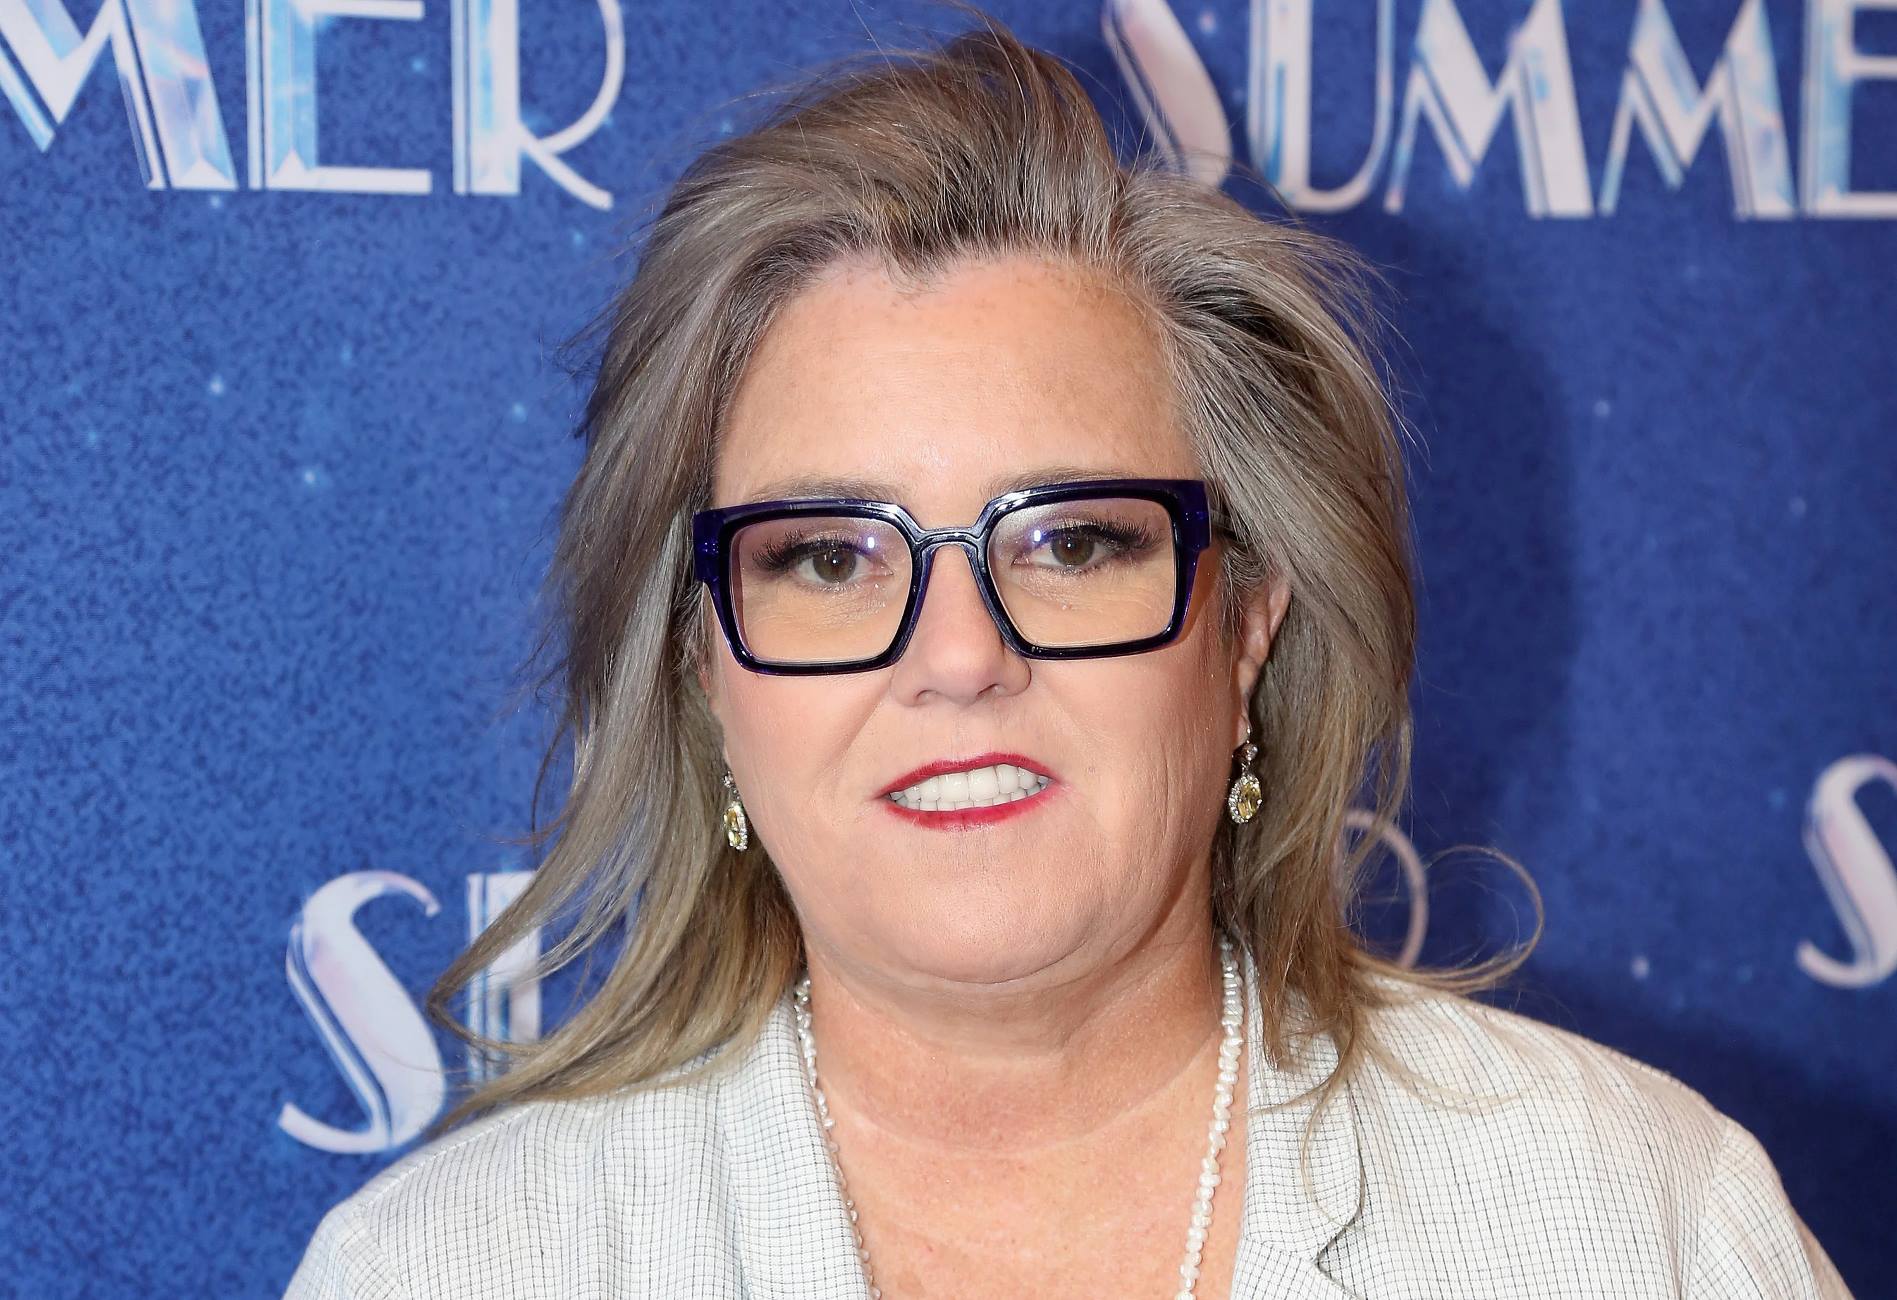 Rosie O’Donnell Expresses Frustration As Drew Barrymore Resumes Talk Show During Writer’s Strike